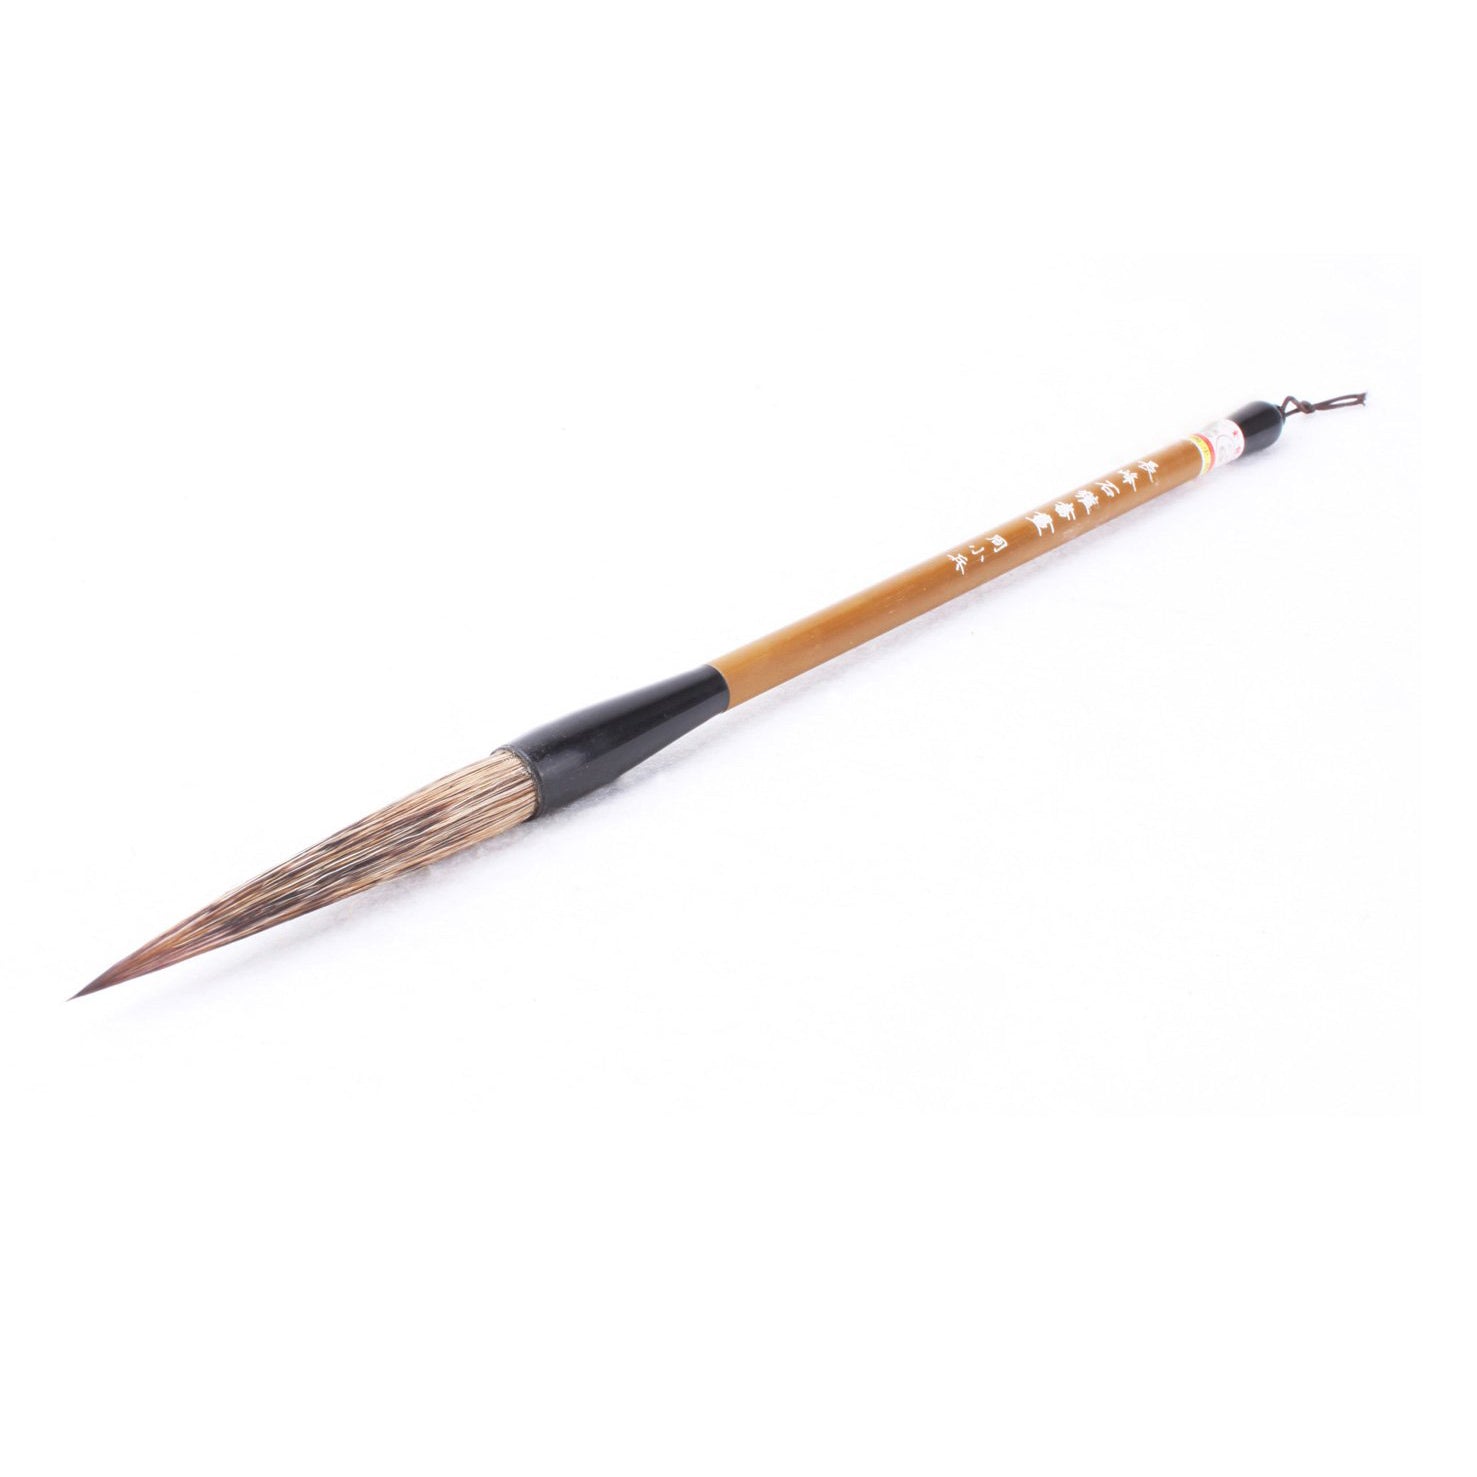 Shorty the Badger - An excellent brush made of Badger Hair with a Long Tip for Calligraphy Writing